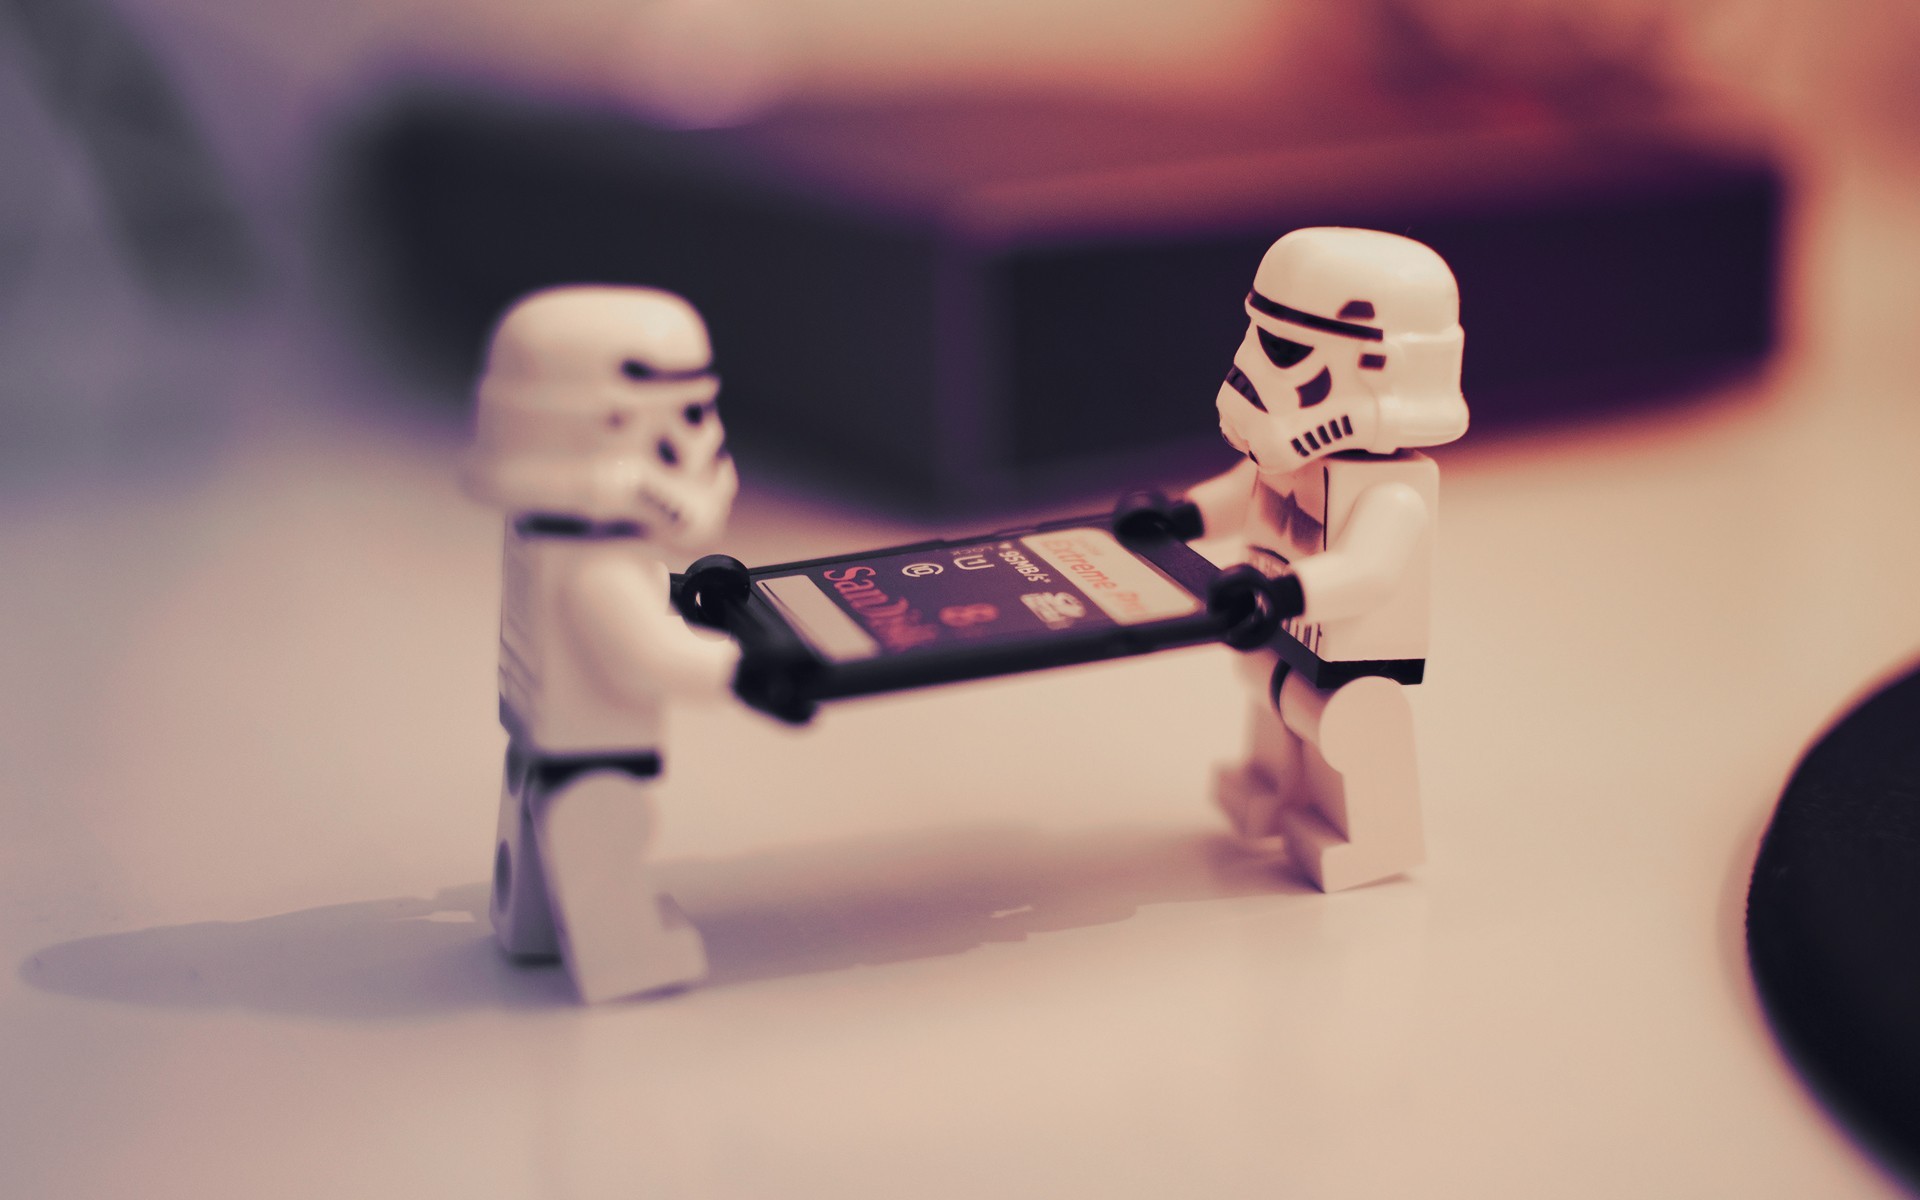 Lego stormtroopers carrying a SD Card wallpaper 19398